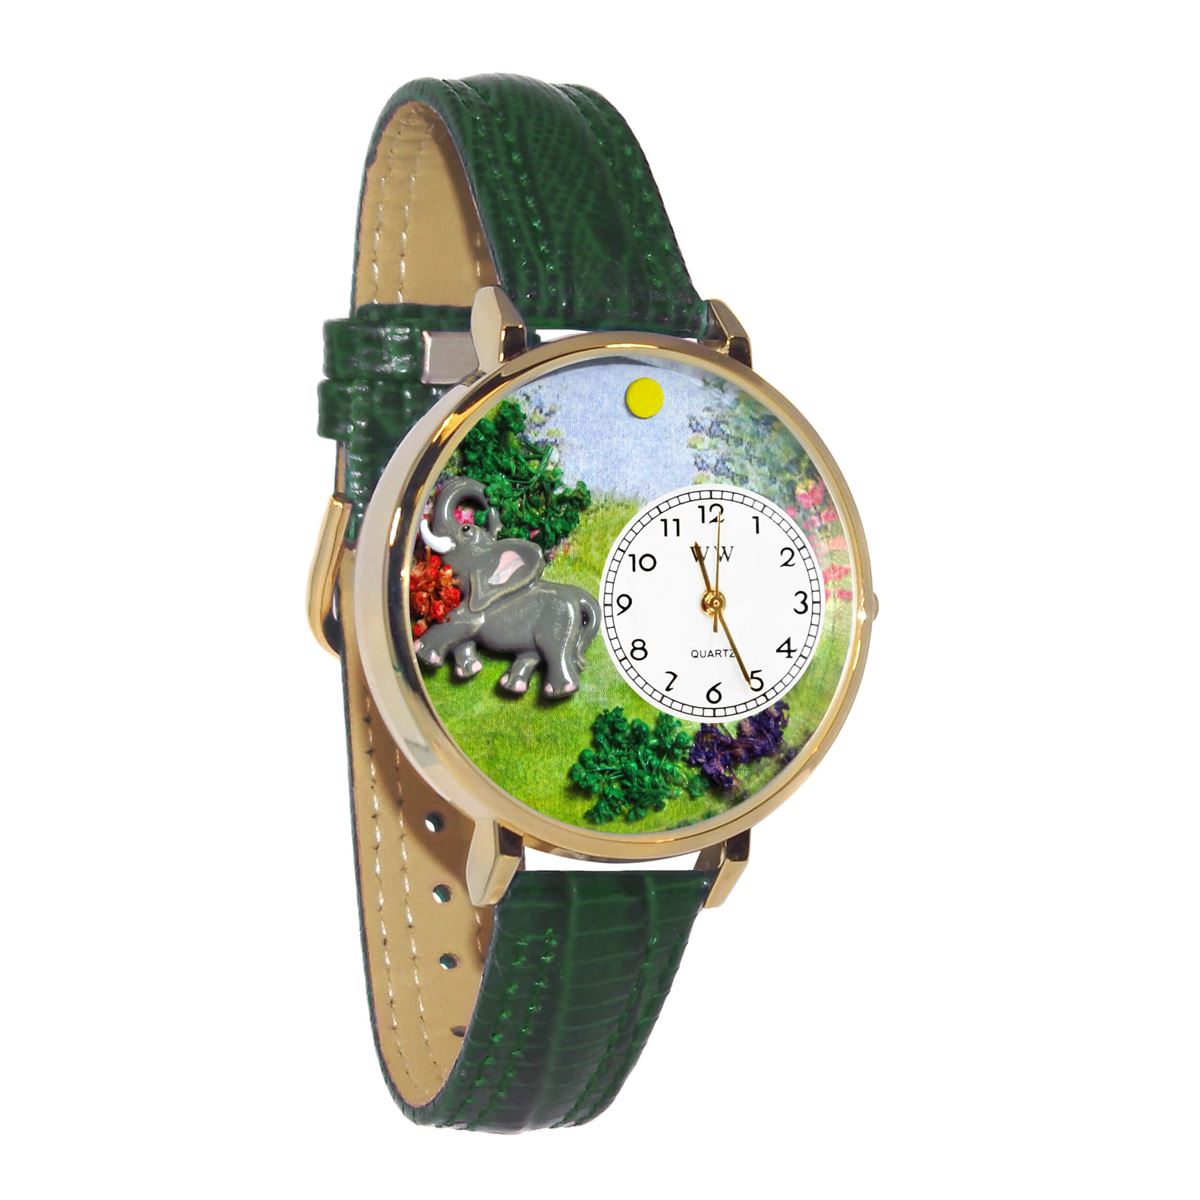 Whimsical Gifts | Elephant 3D Watch Large Style | Handmade in USA | Animal Lover | Zoo & Sealife | Novelty Unique Fun Miniatures Gift | Gold Finish Green Leather Watch Band